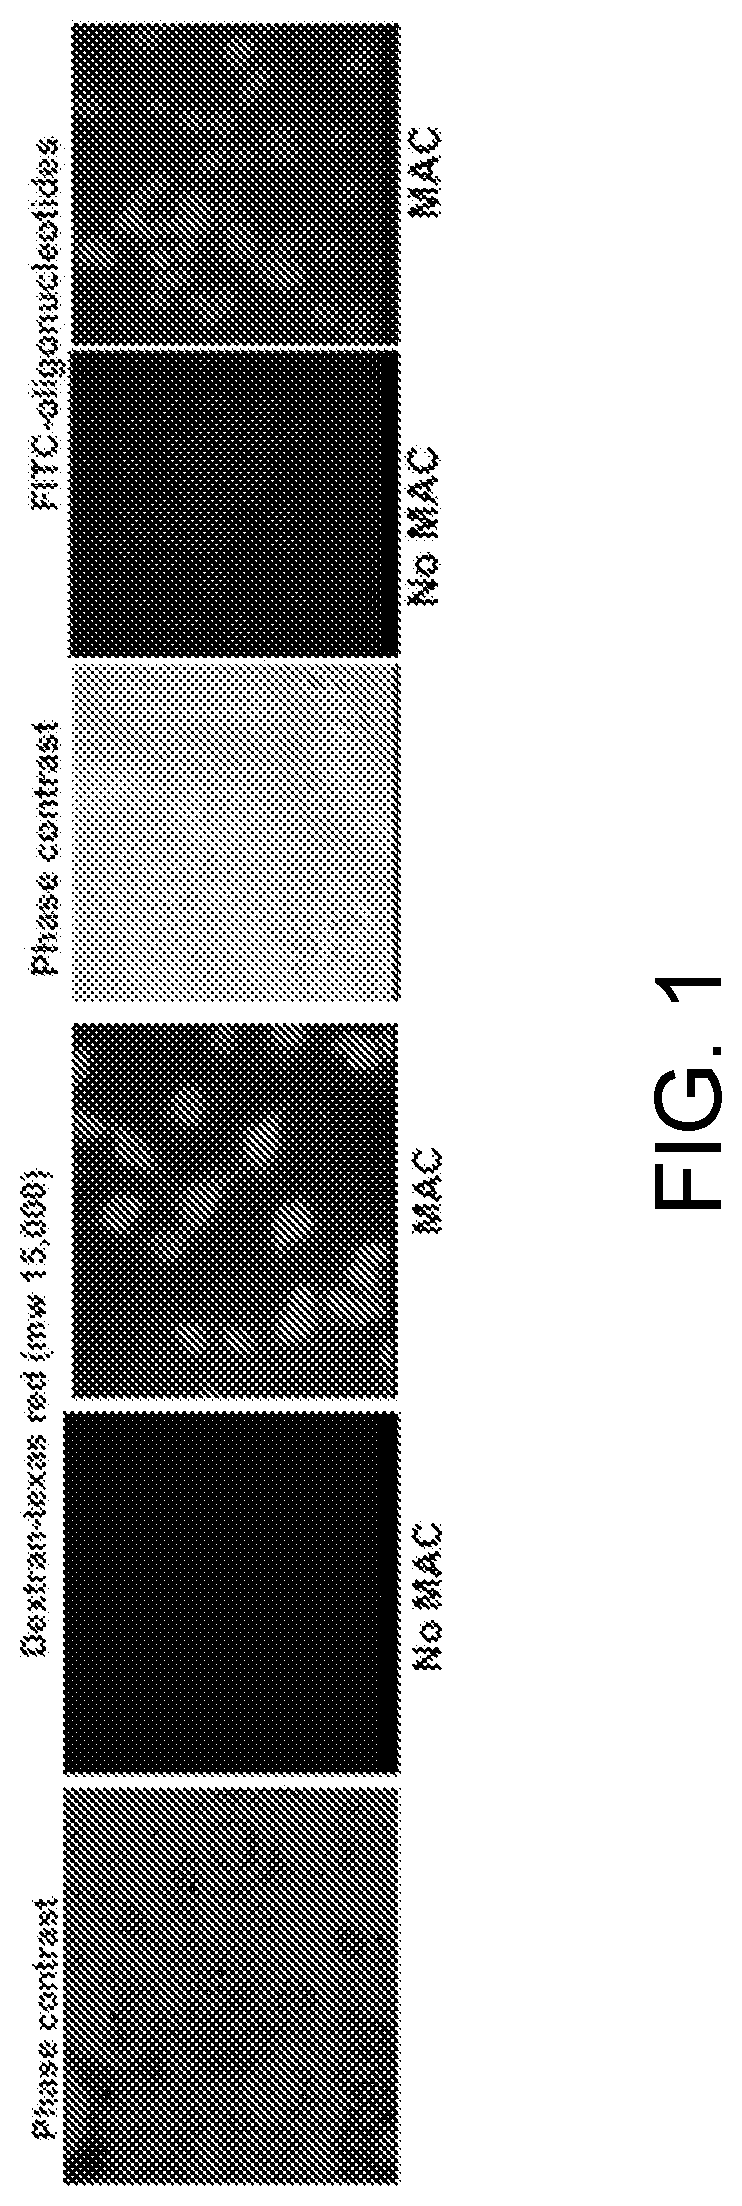 Membrane attack complexes and uses thereof